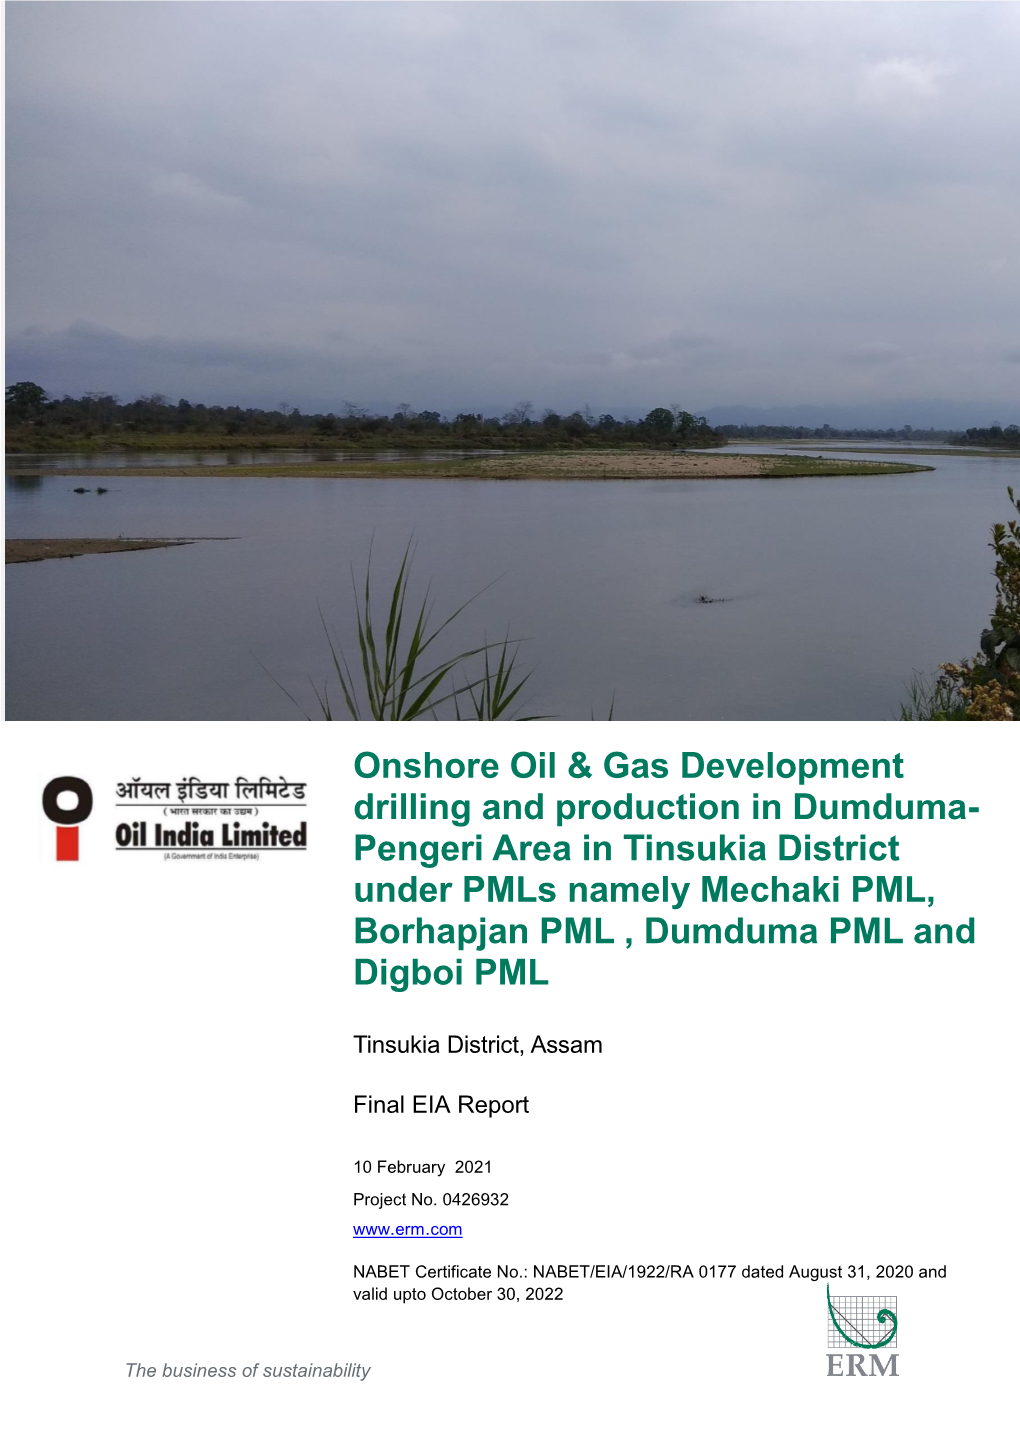 Onshore Oil & Gas Development Drilling and Production in Dumduma